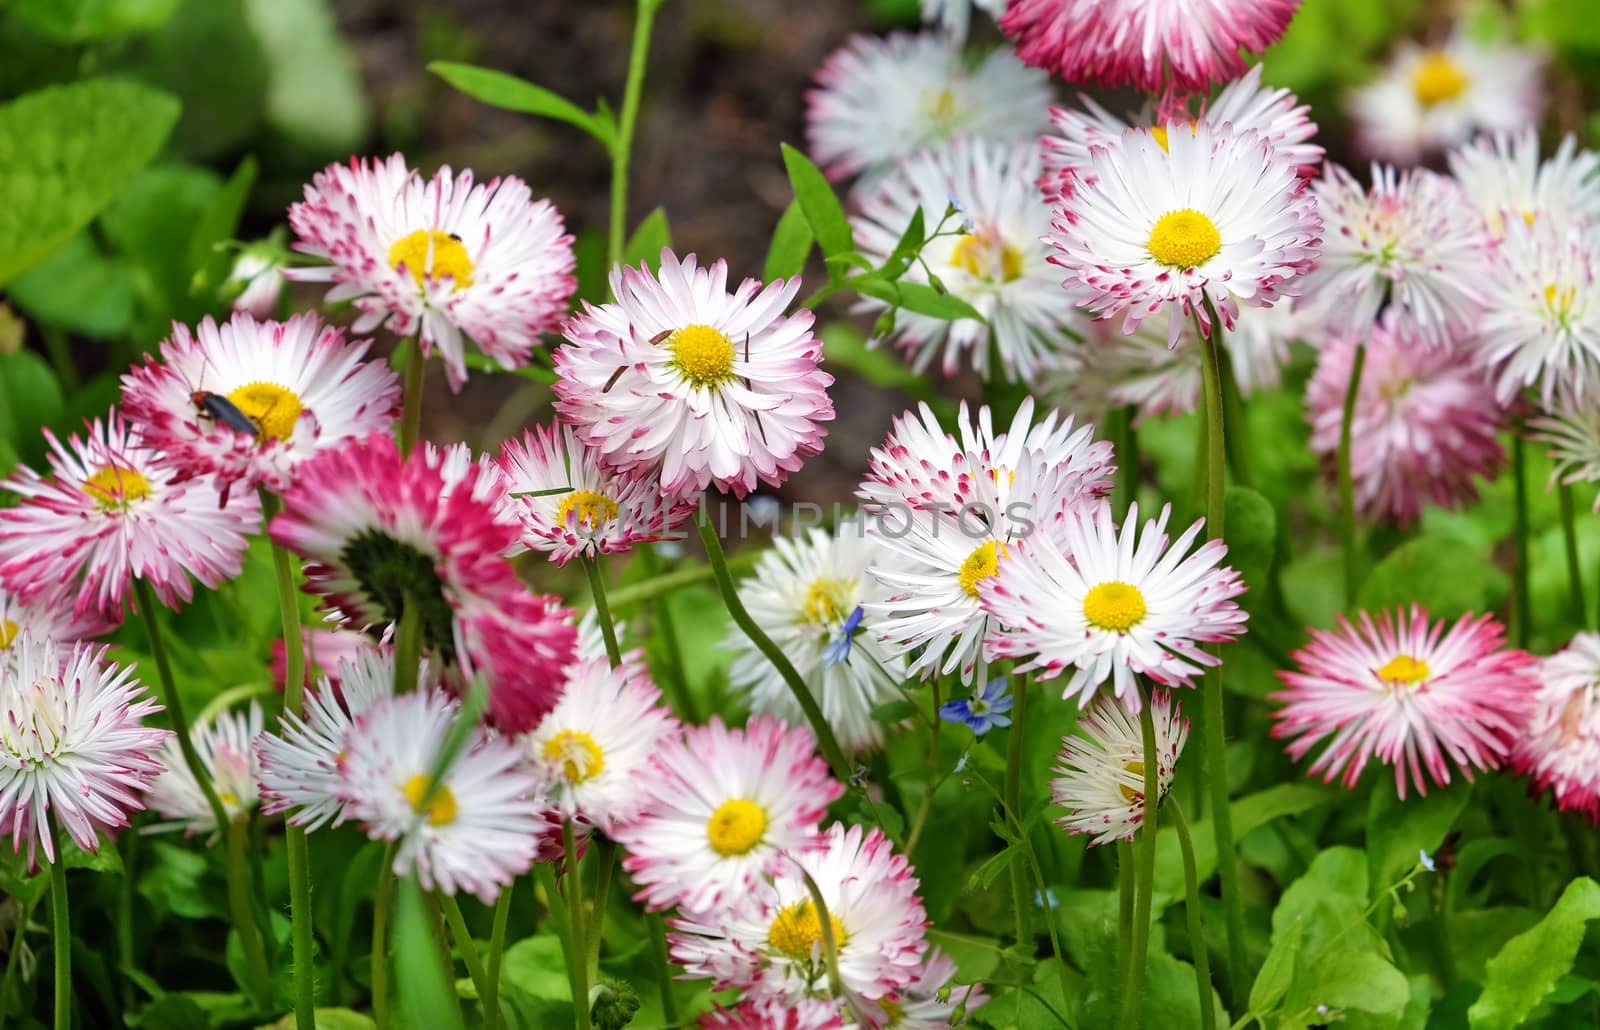 Blooming white and pink daisies in a natural environment for the background.